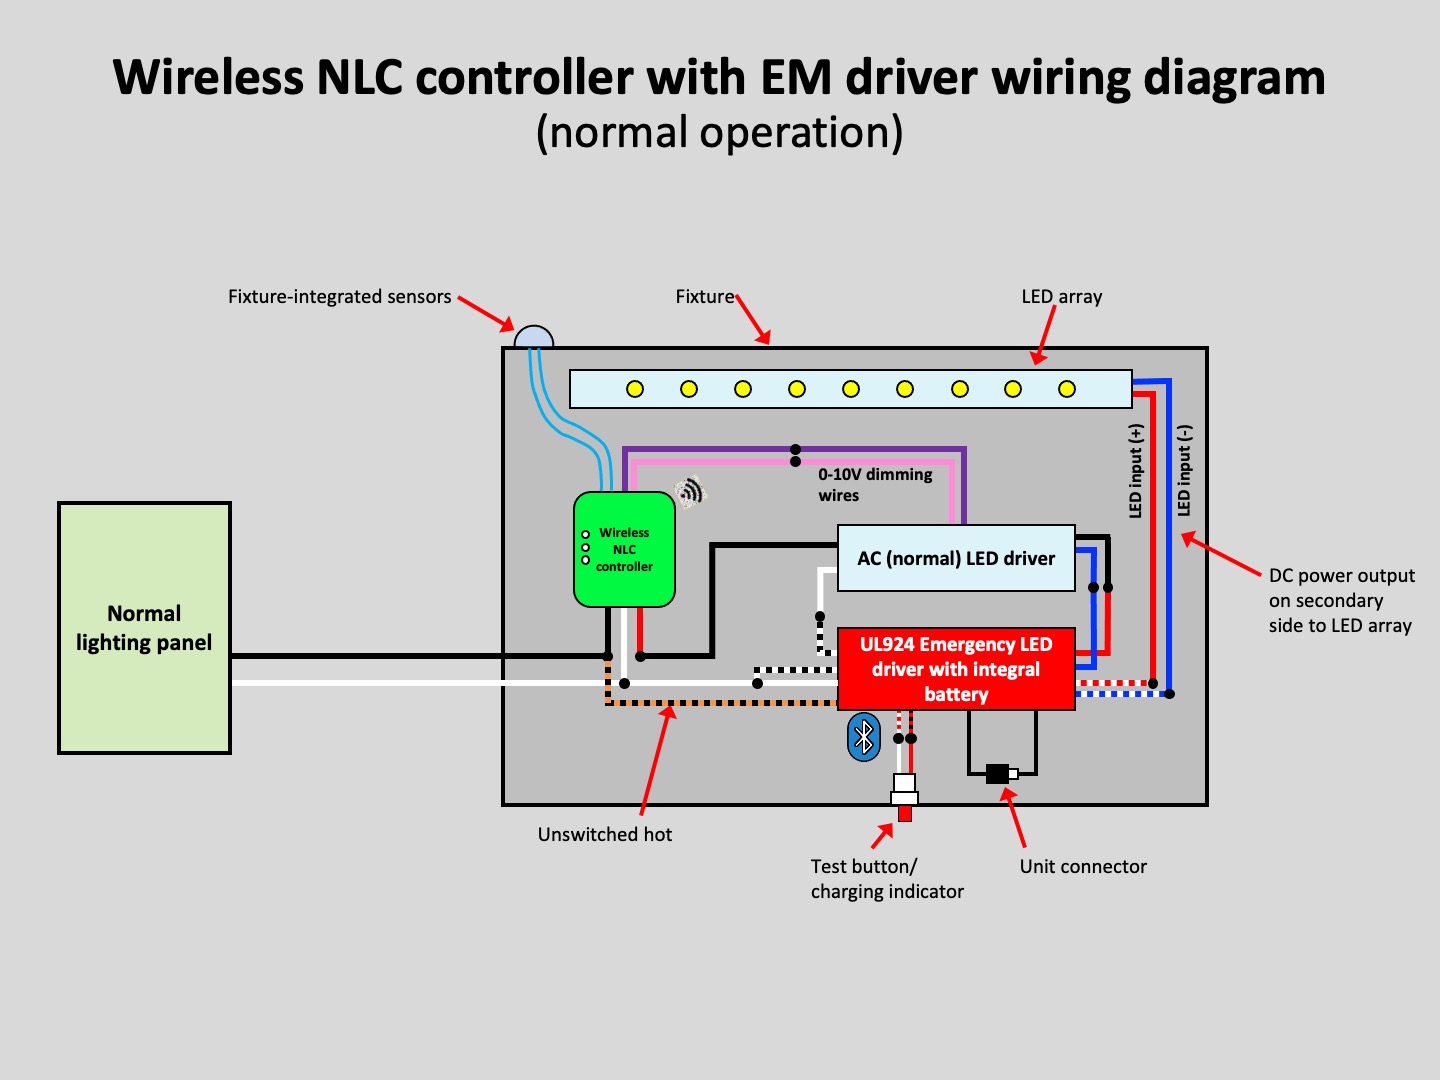 Wireless NLC controller with EM driver wiring diagram Fixture-integrated sensors (normal operation)